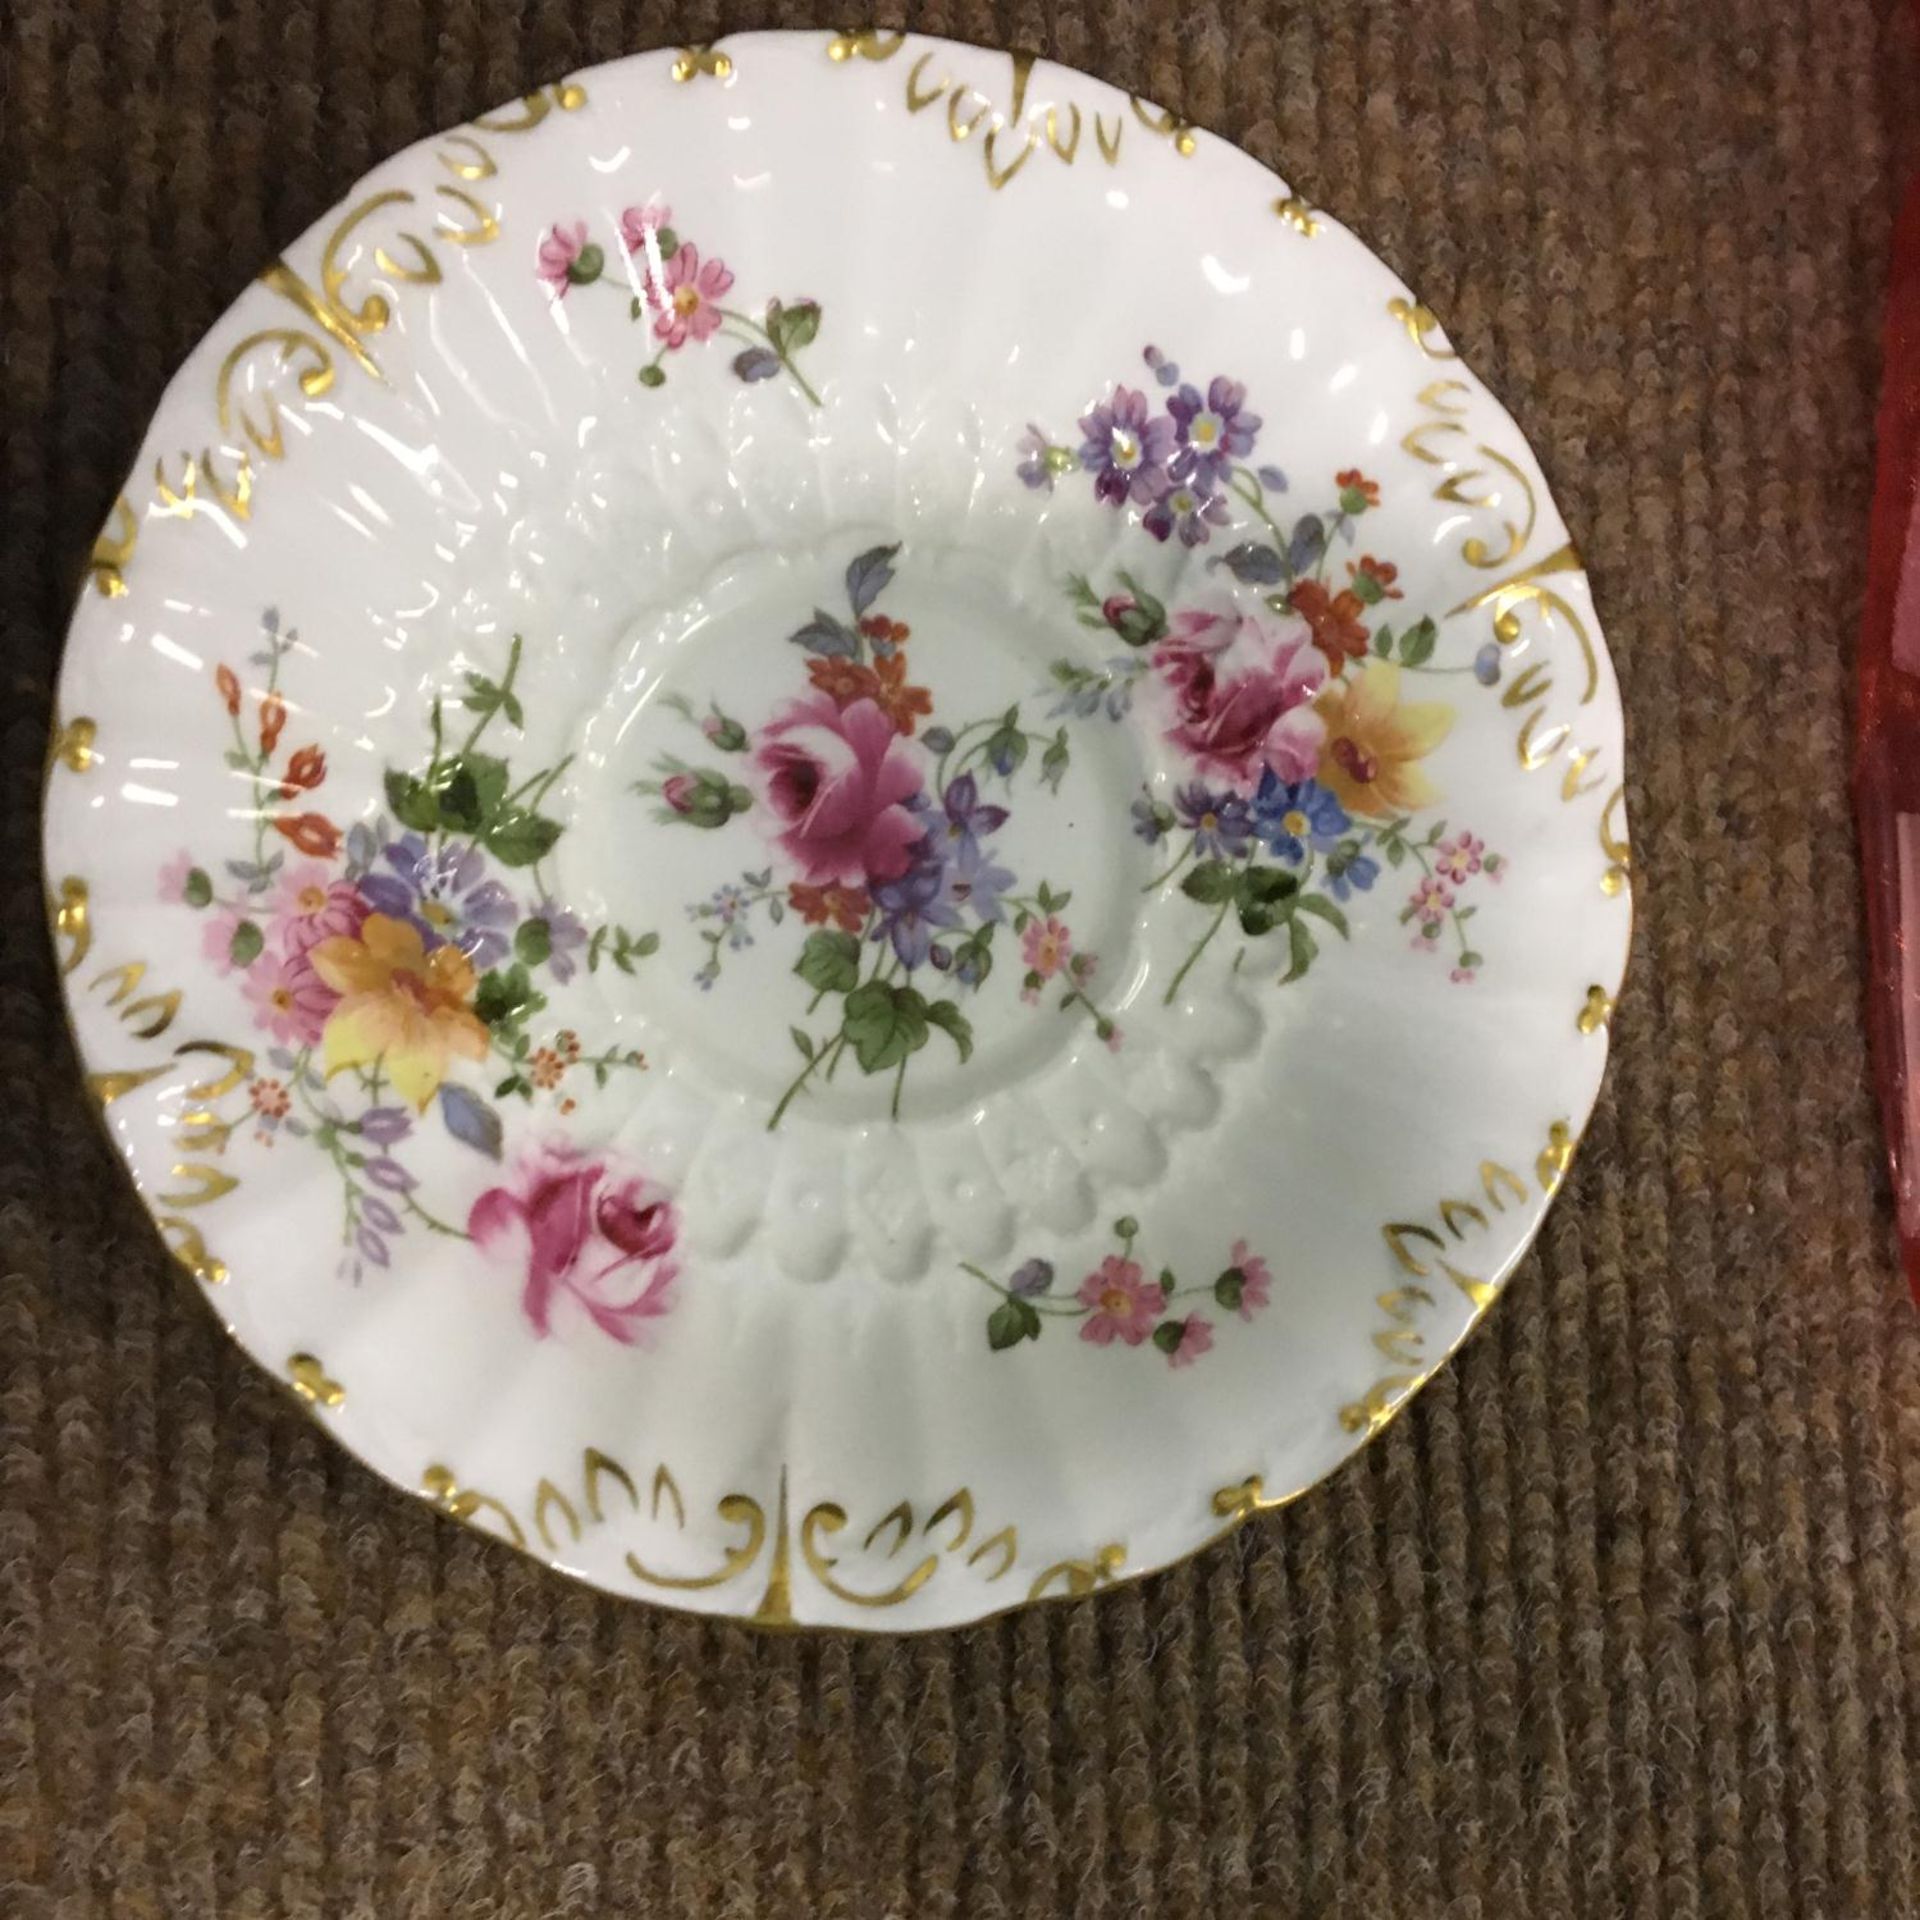 Pretty Floral Plate by Bow - Good condition